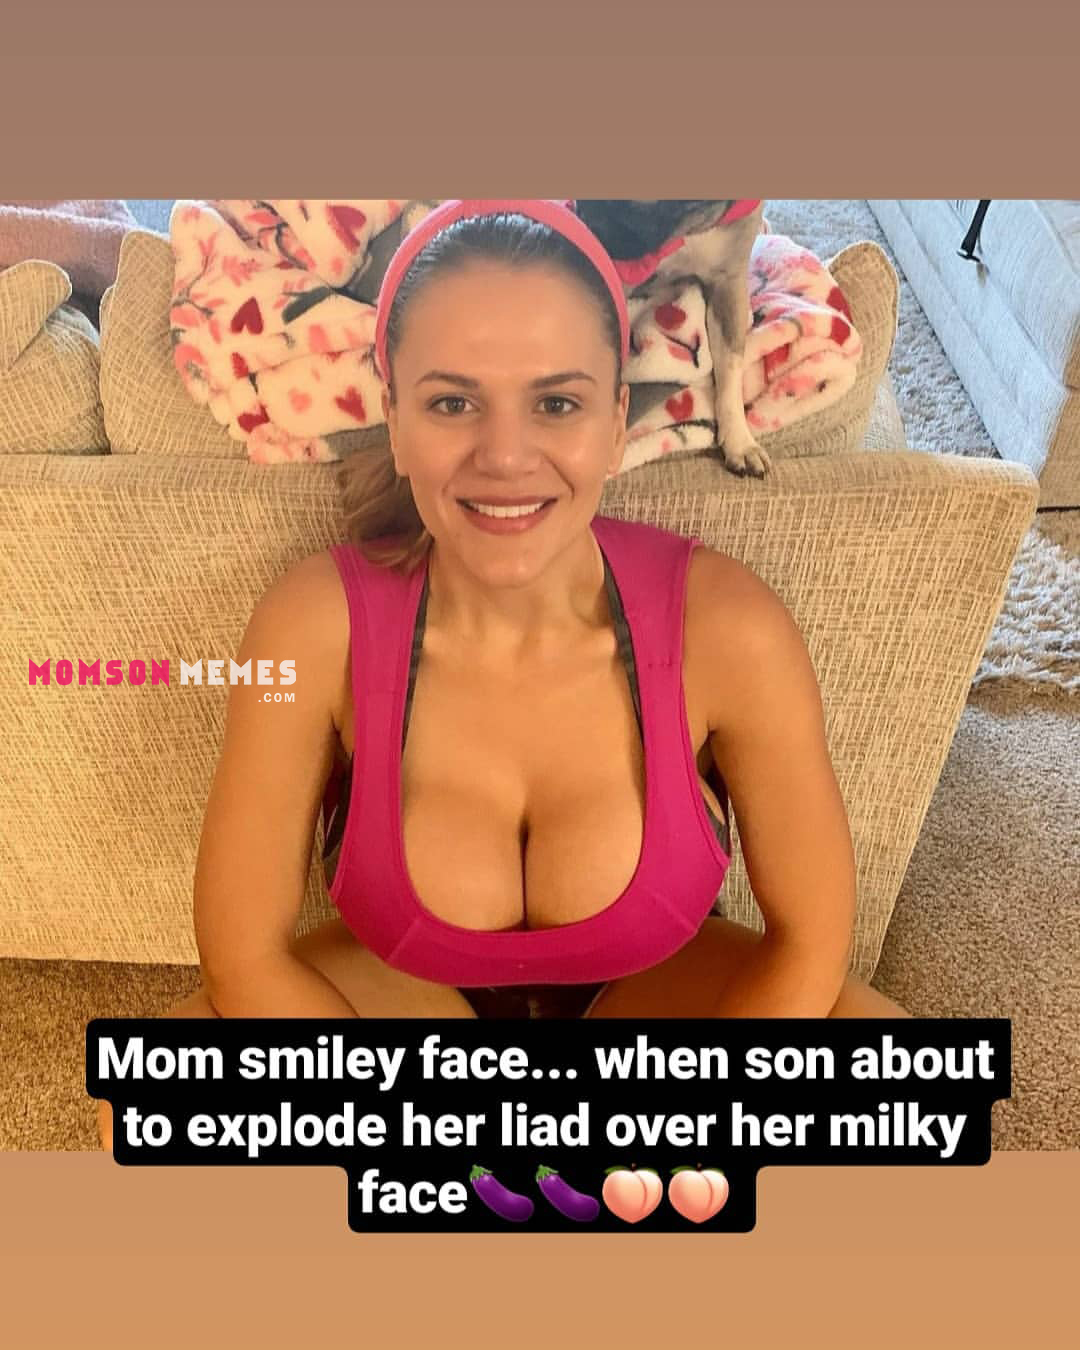 Busty Incest Porn Captions - indian Archives - Page 4 of 43 - Incest Mom Son Captions Memes